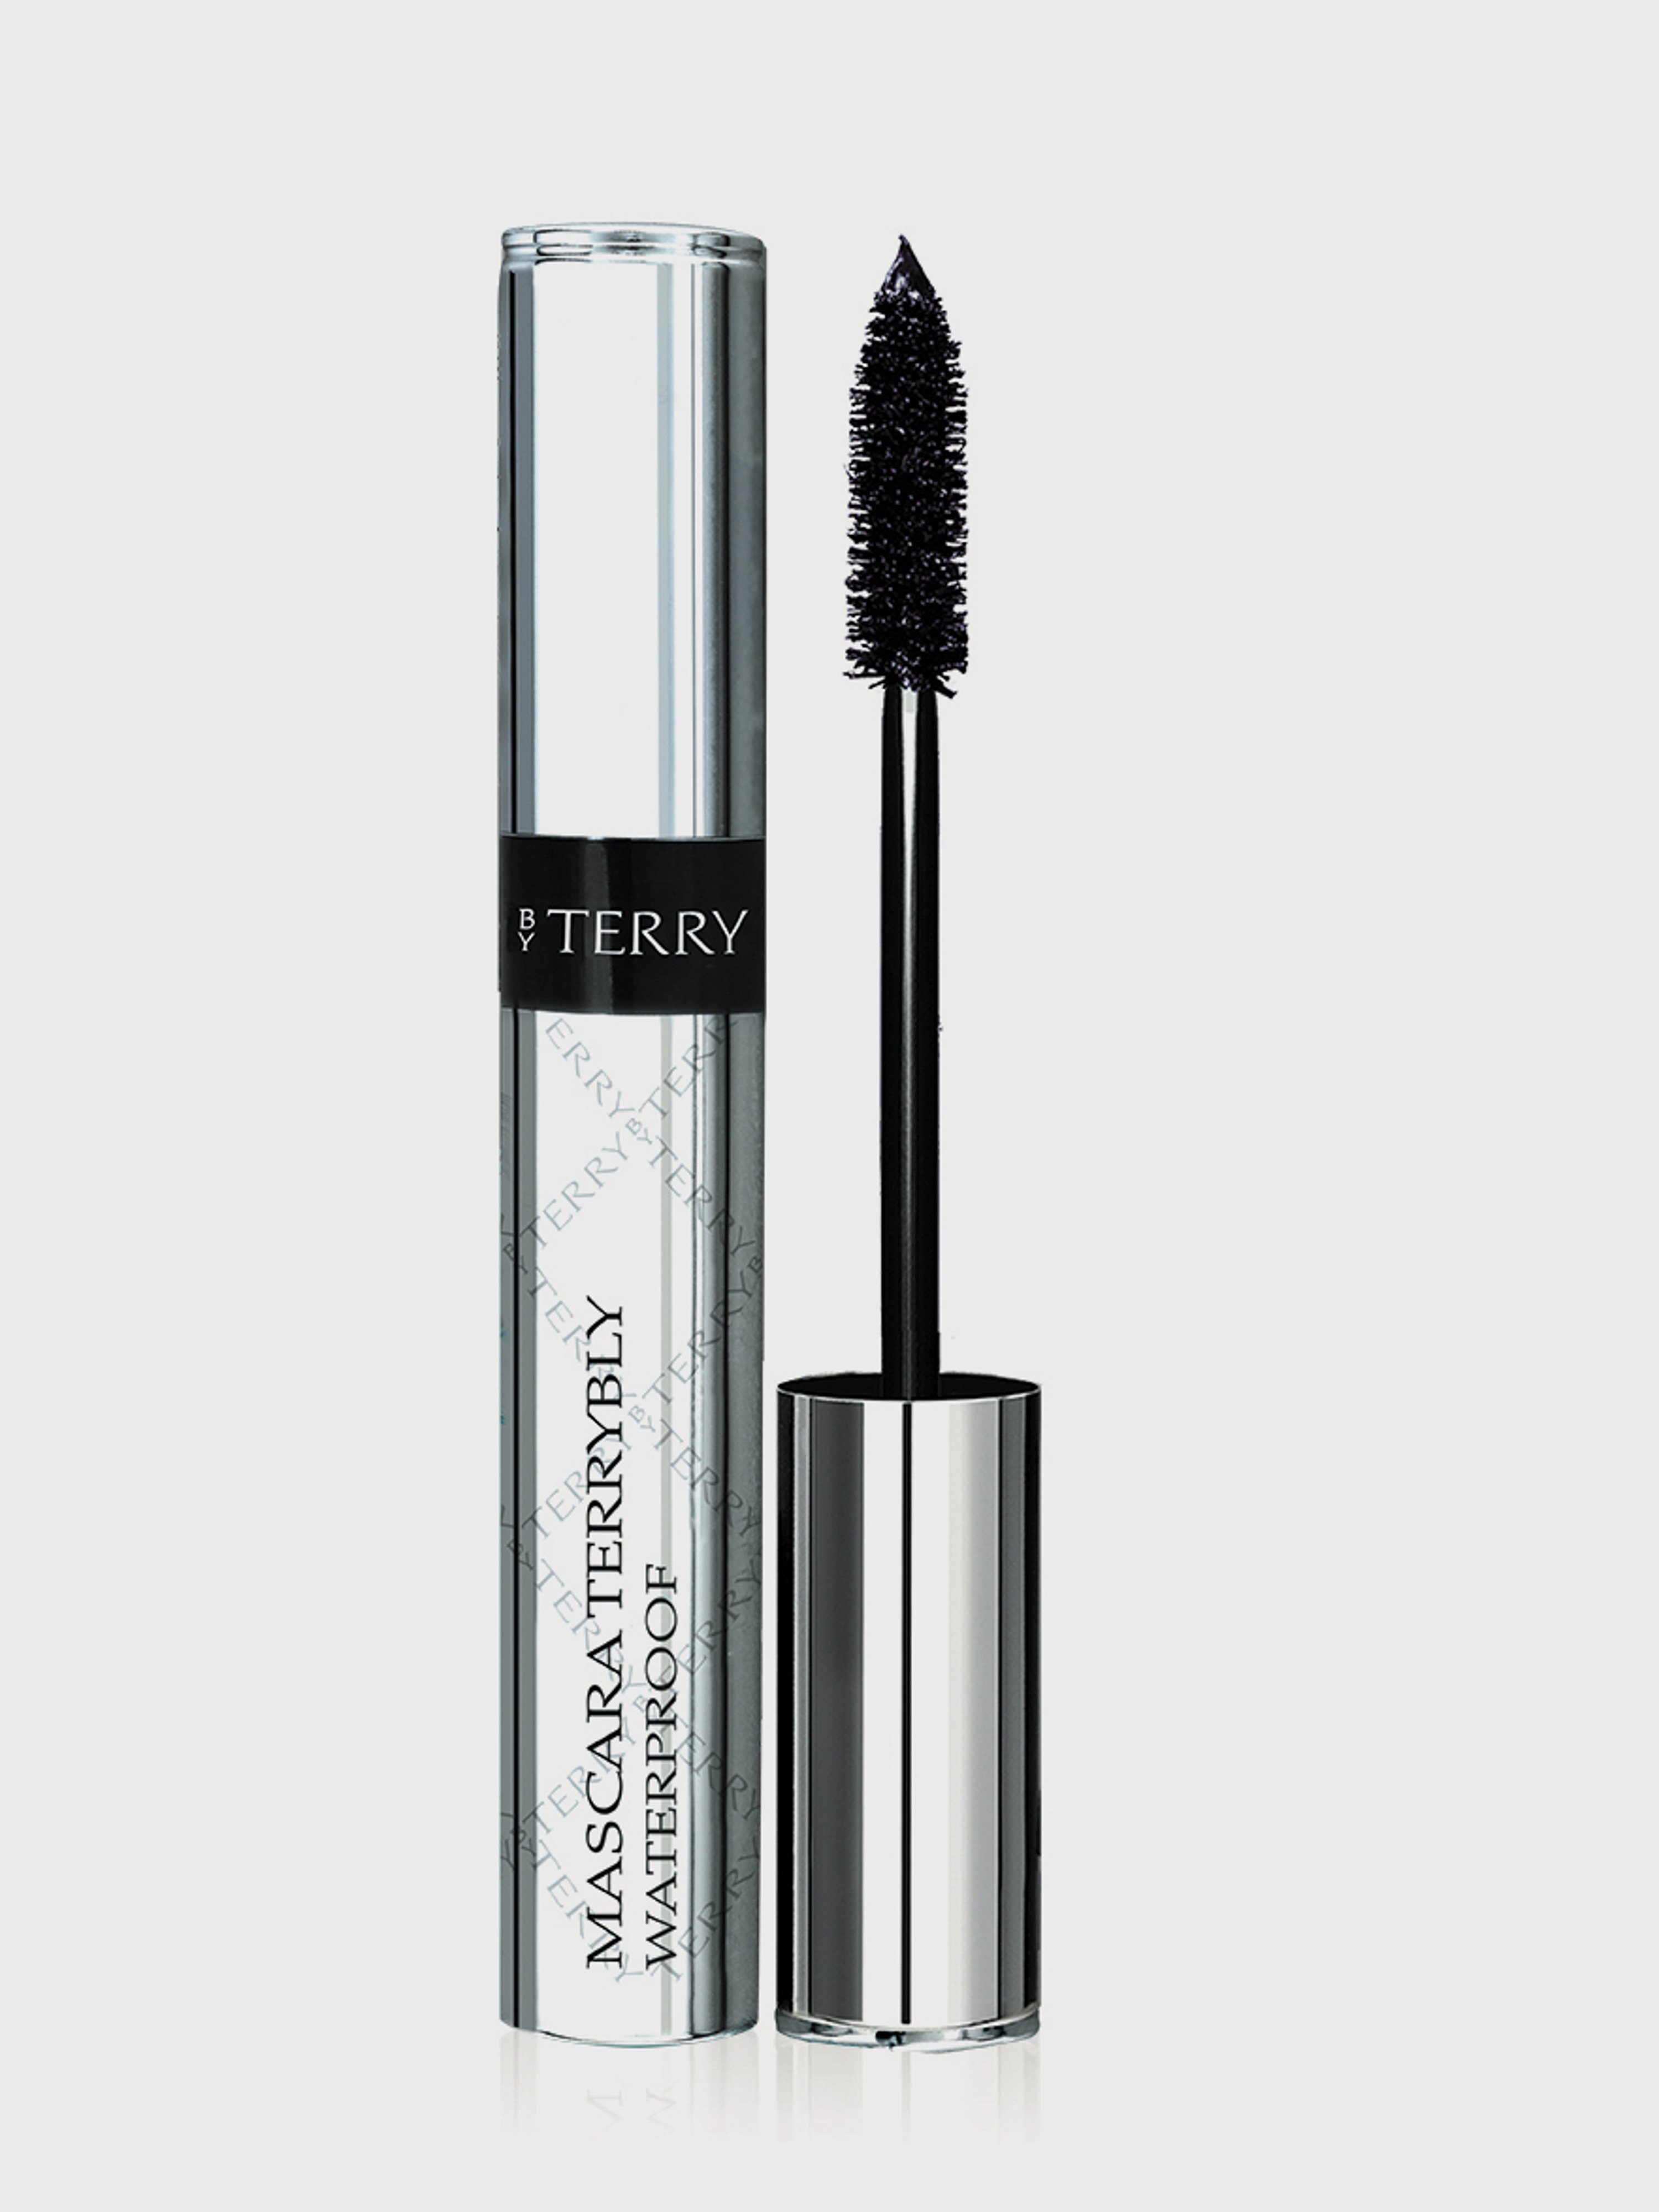 BY TERRY BY TERRY MASCARA TERRYBLY WATERPROOF